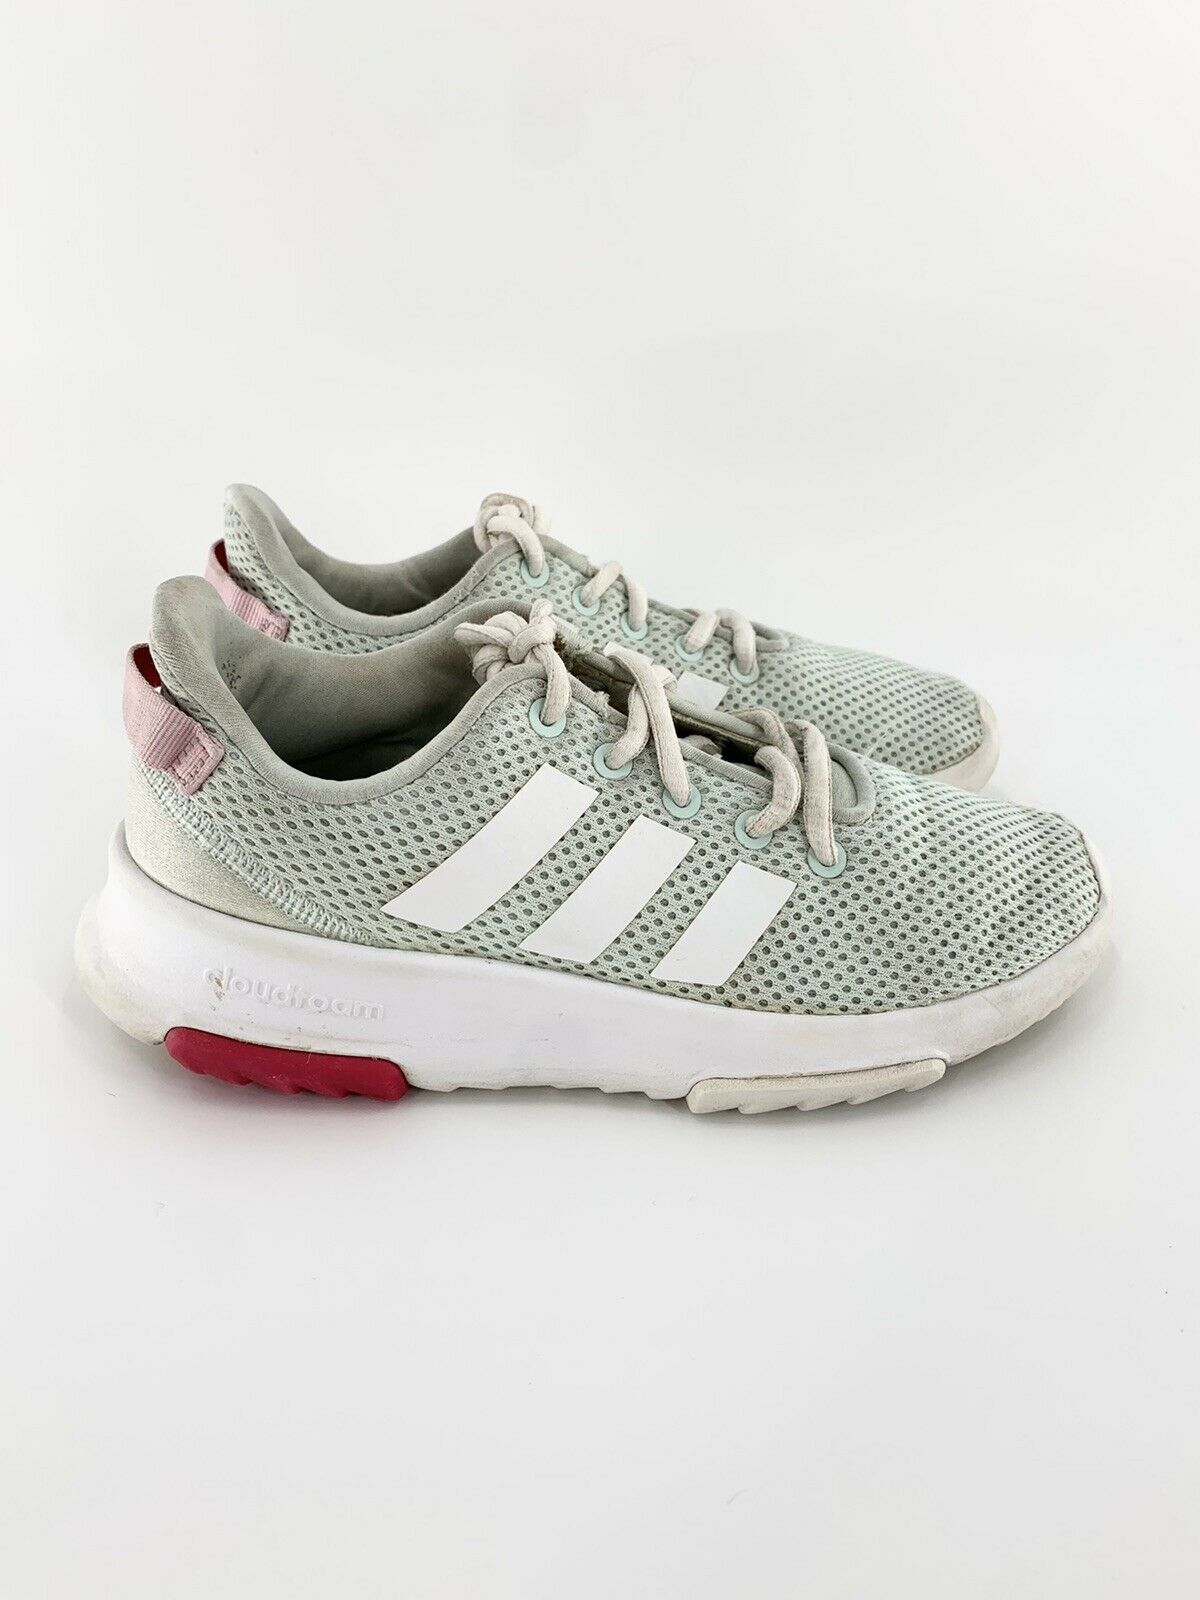 Adidas Cloudfoam Green White Sneakers Girls Size 2 Running Athletic Shoes